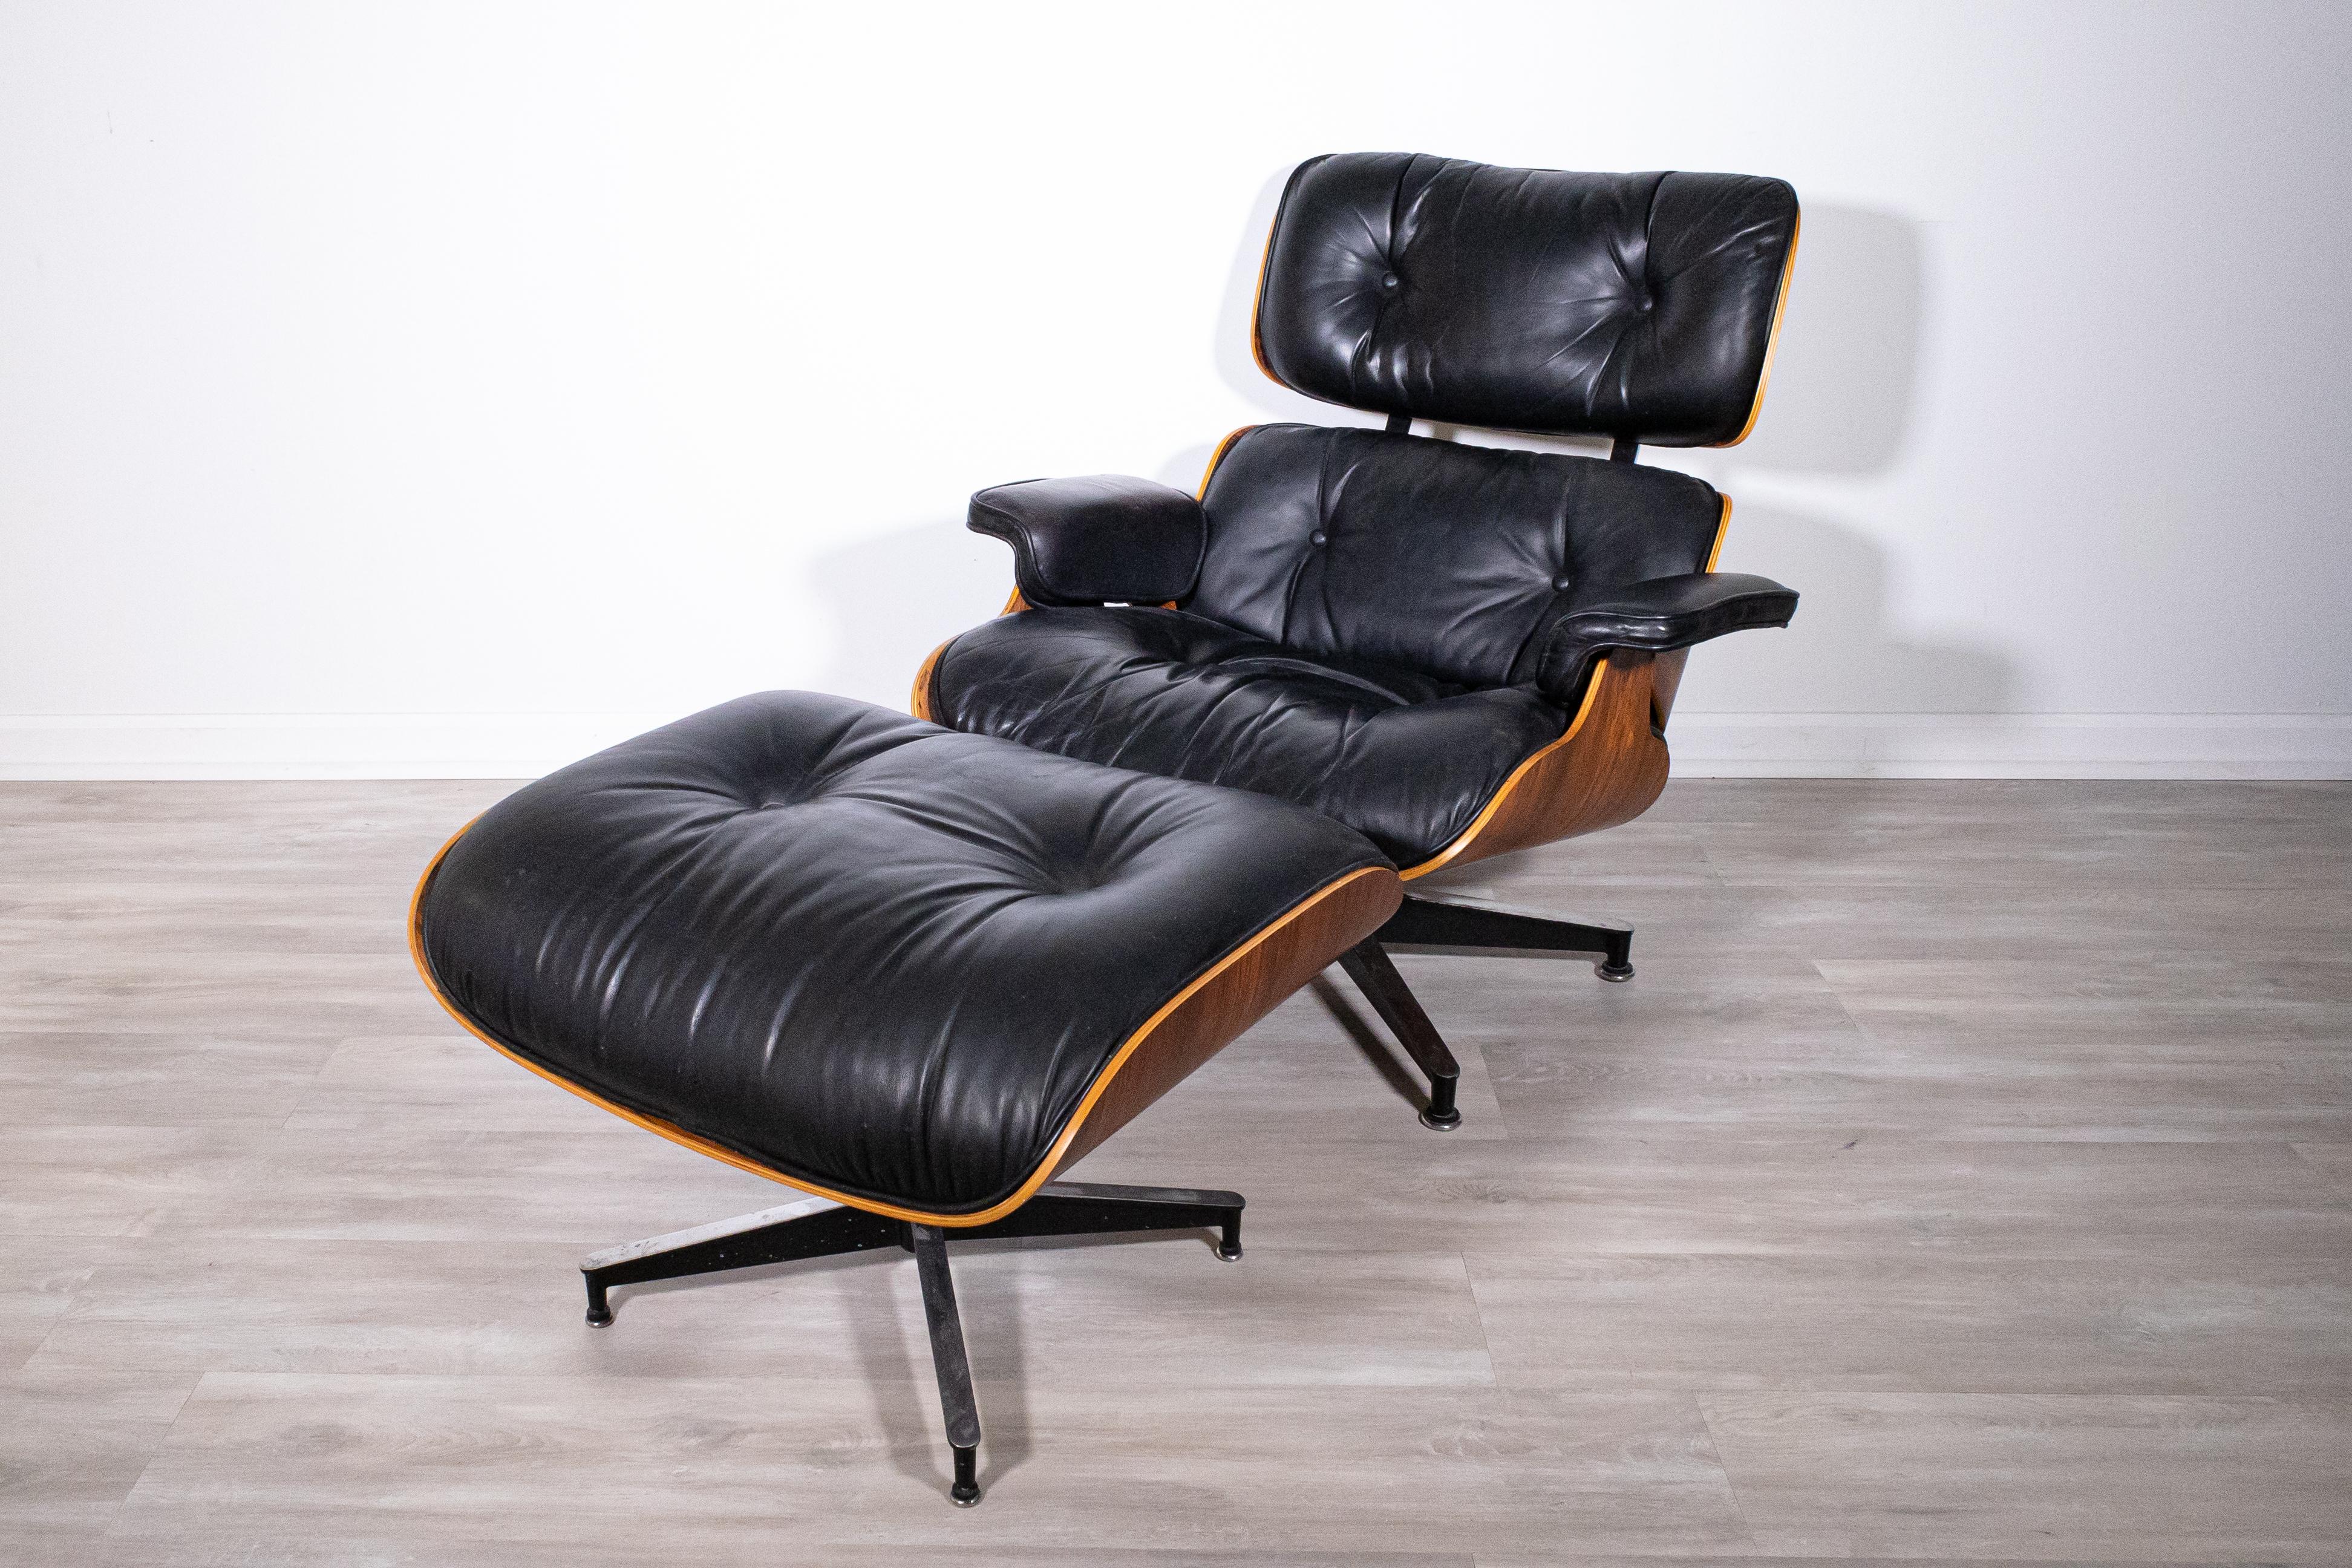 Eames Herman Miller rosewood lounge chair & ottoman 1986. This iconic lounge chair is a staple of mid century modern homes and offices. It features original upholstery and construction. This piece in particular features a rare rosewood finish.